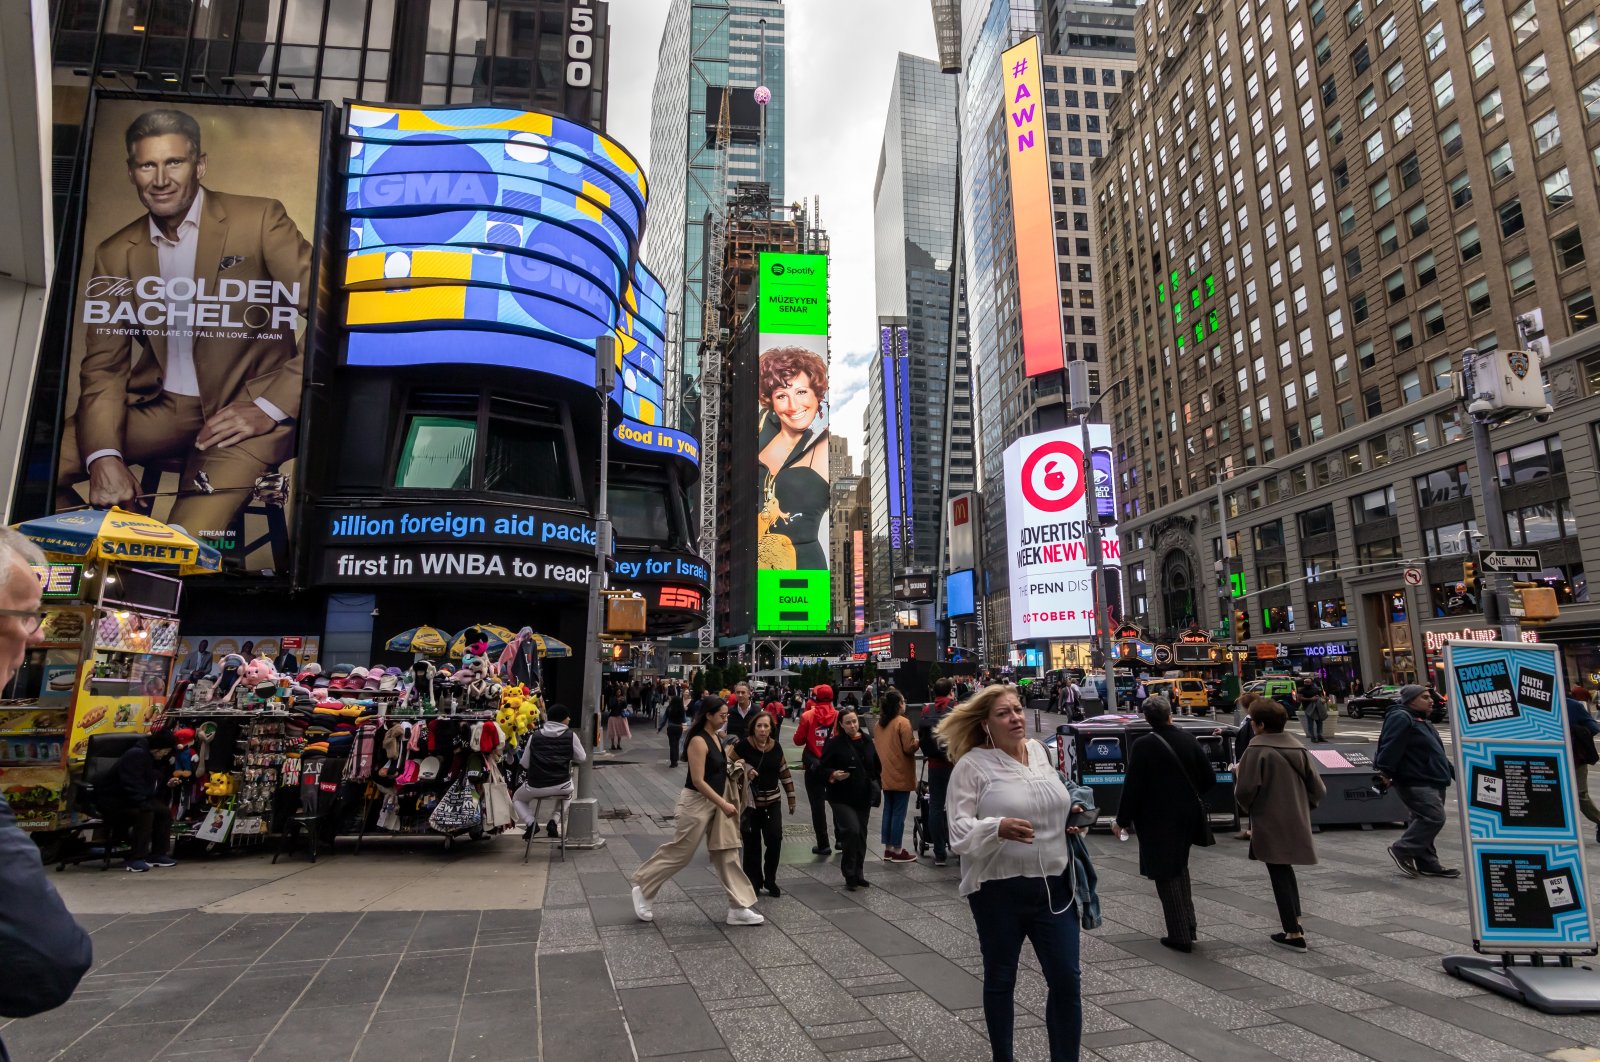 Müzeyyen Senar, fondly known as the &quot;Diva of the Republic,&quot; made an appearance in the heart of New York City&#039;s Times Square, New York, U.S. (Photo courtesy of Spotify)